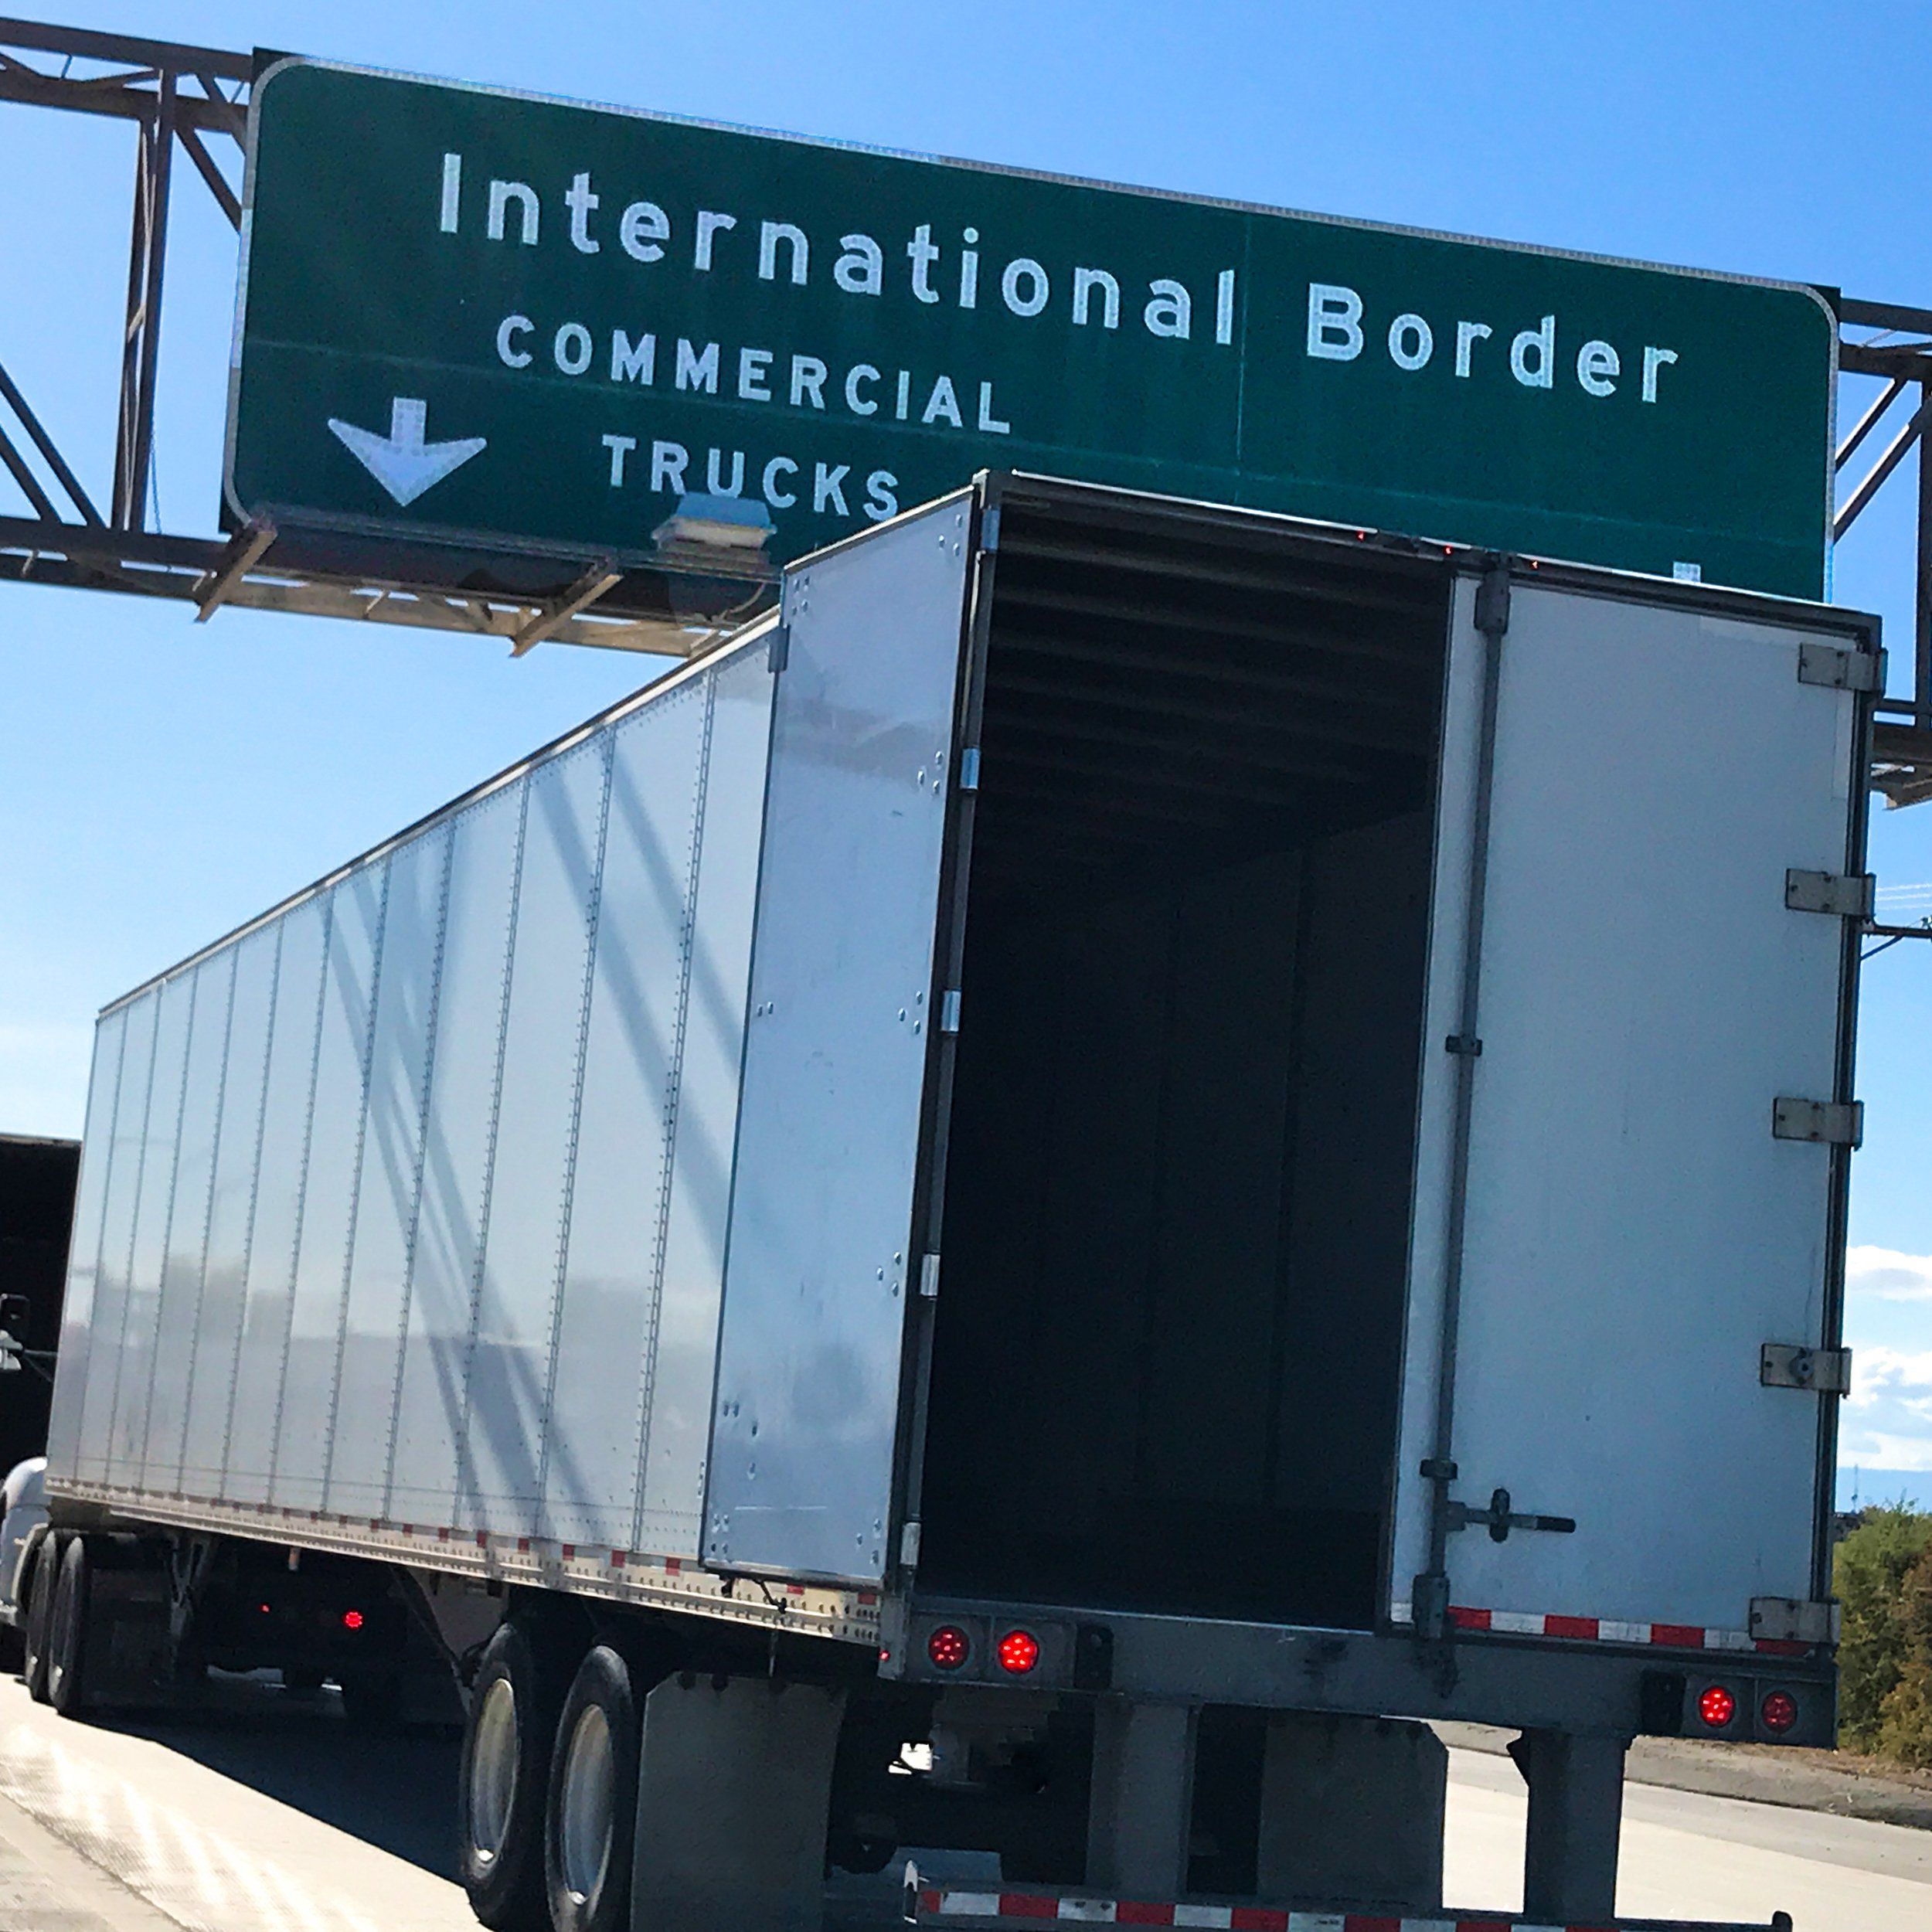 A white semi-truck sits in the Commercial Rental Truck line at the International Border.